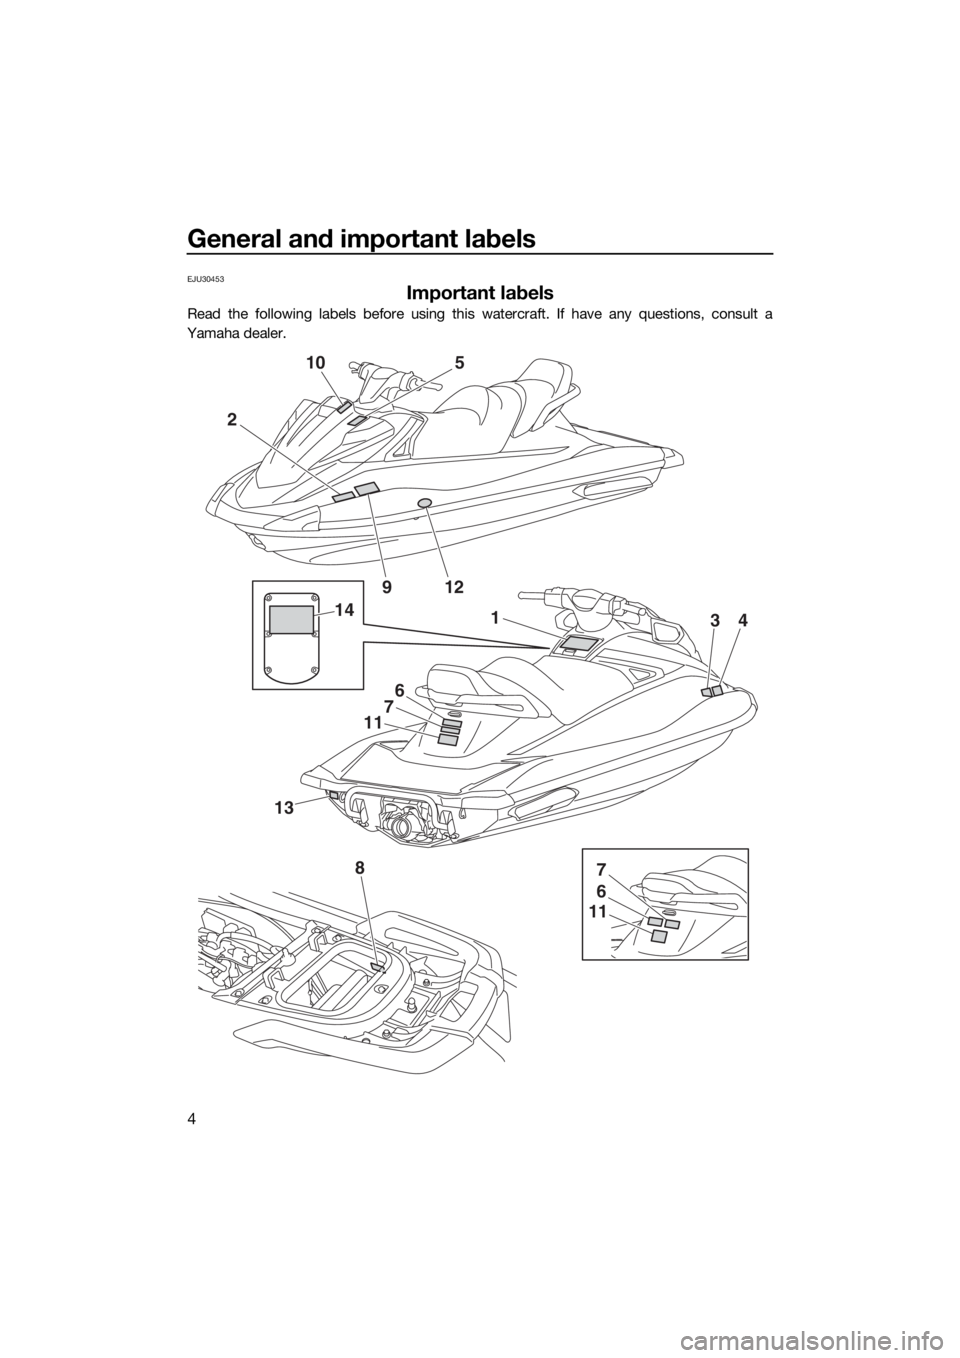 YAMAHA VX 2015  Owners Manual General and important labels
4
EJU30453
Important labels
Read the following labels before using this watercraft. If have any questions, consult a
Yamaha dealer.
2
10
1
6
7
11
6
7
11
13
8
34
5
912
14
U